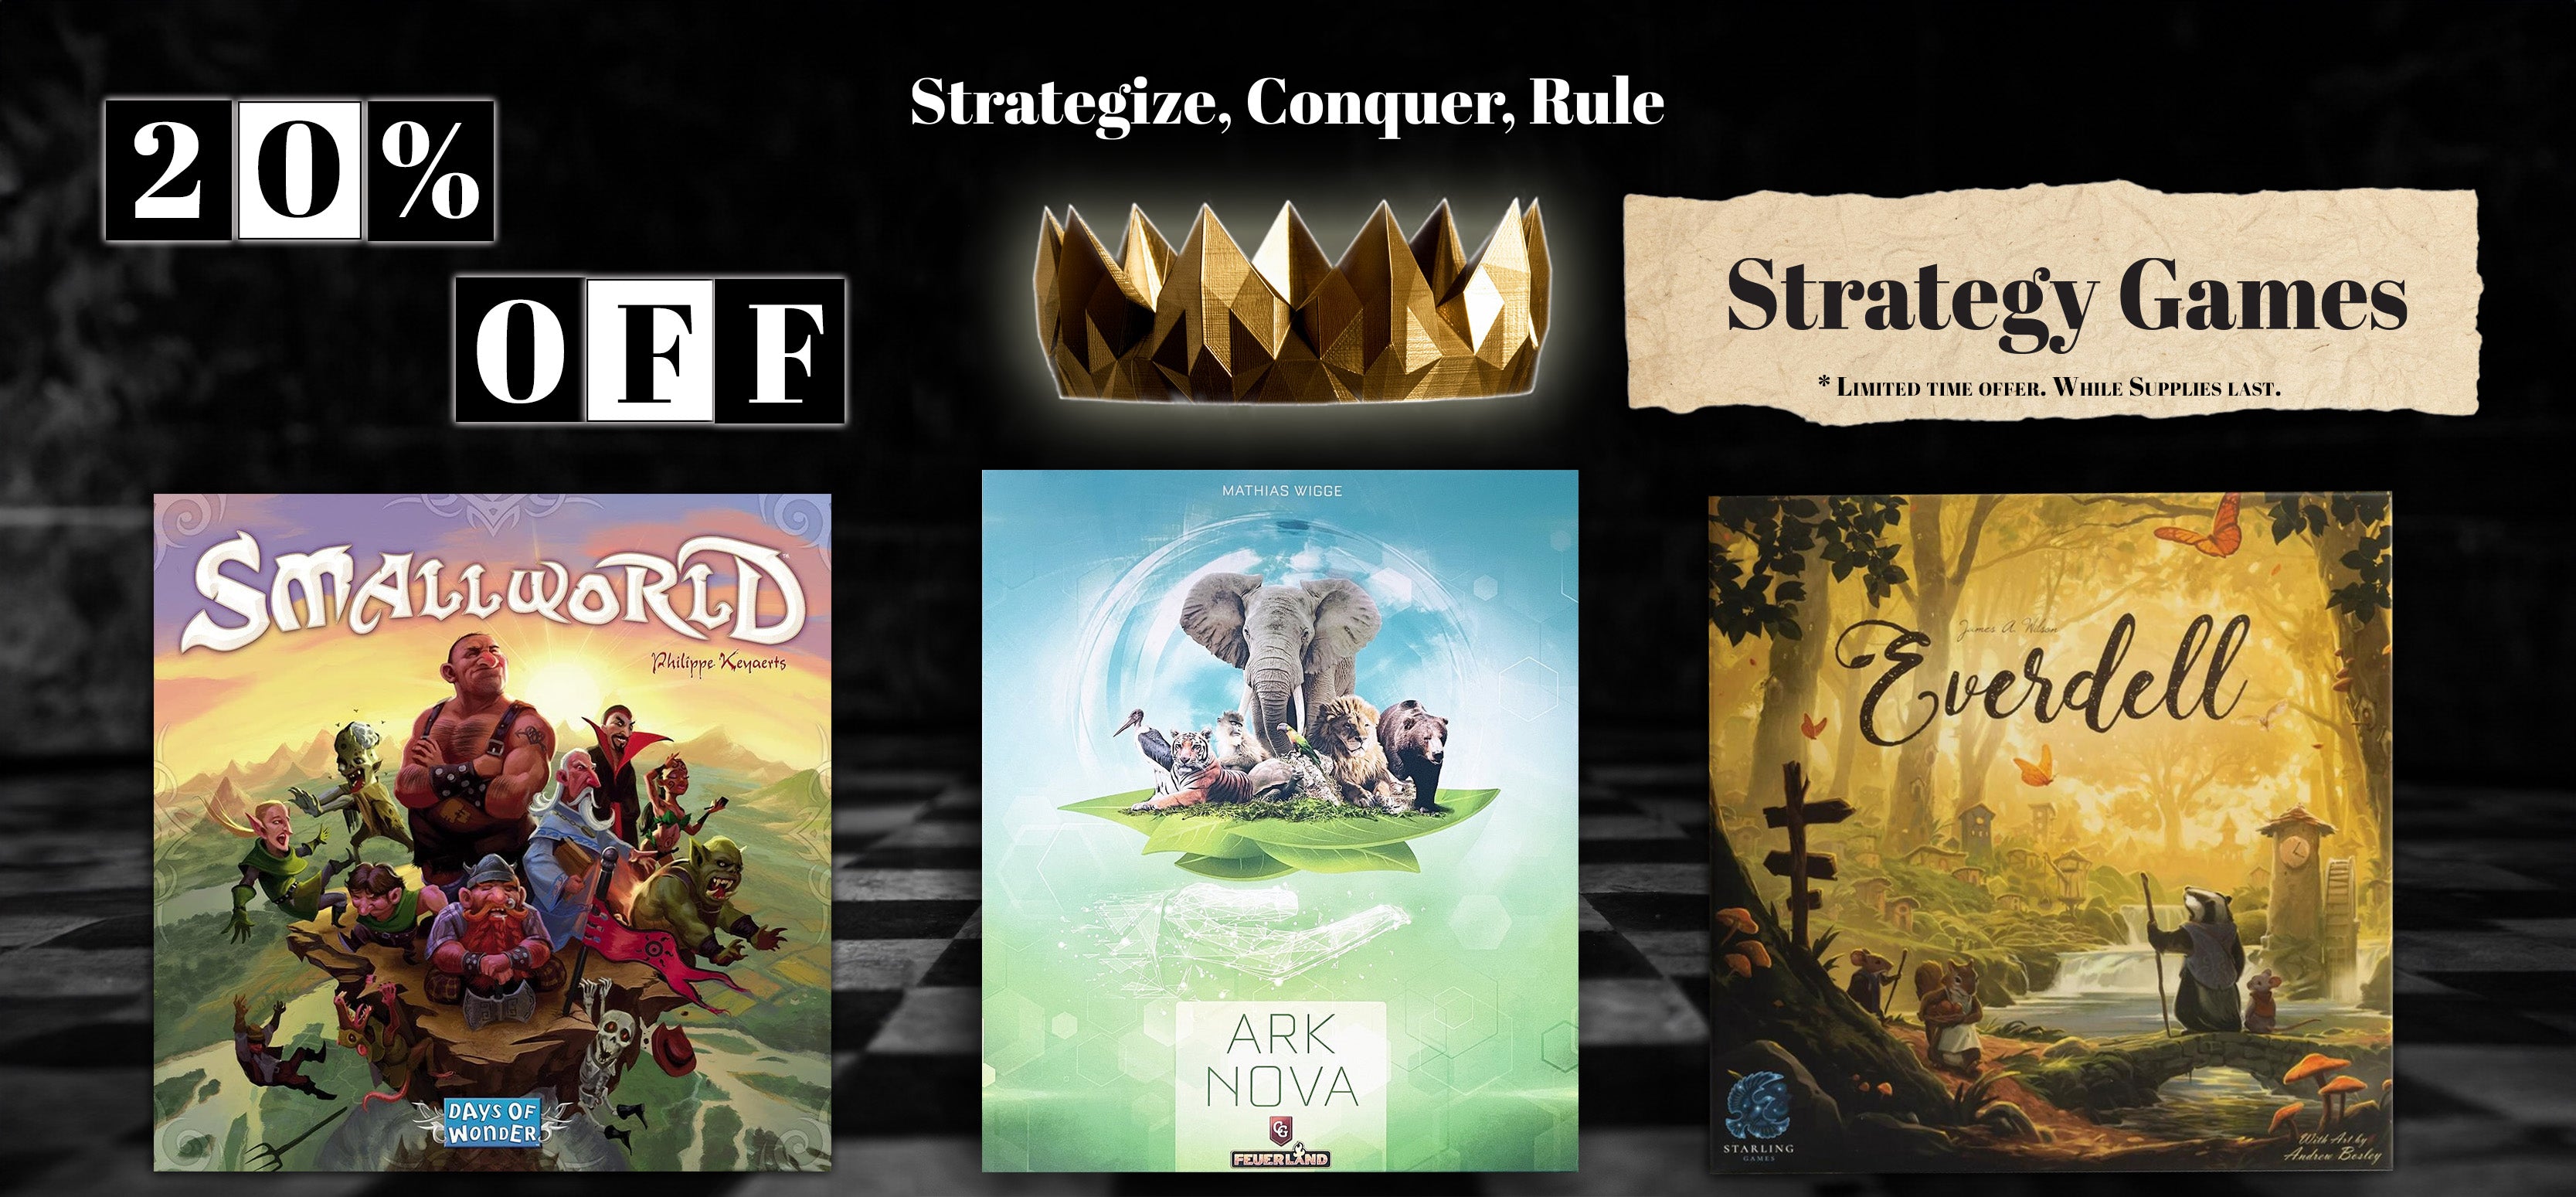 Strategize, advance and conquer! It's all fun and games until you're annihilated. Select strategy games 20% off at Calendarclub.ca.